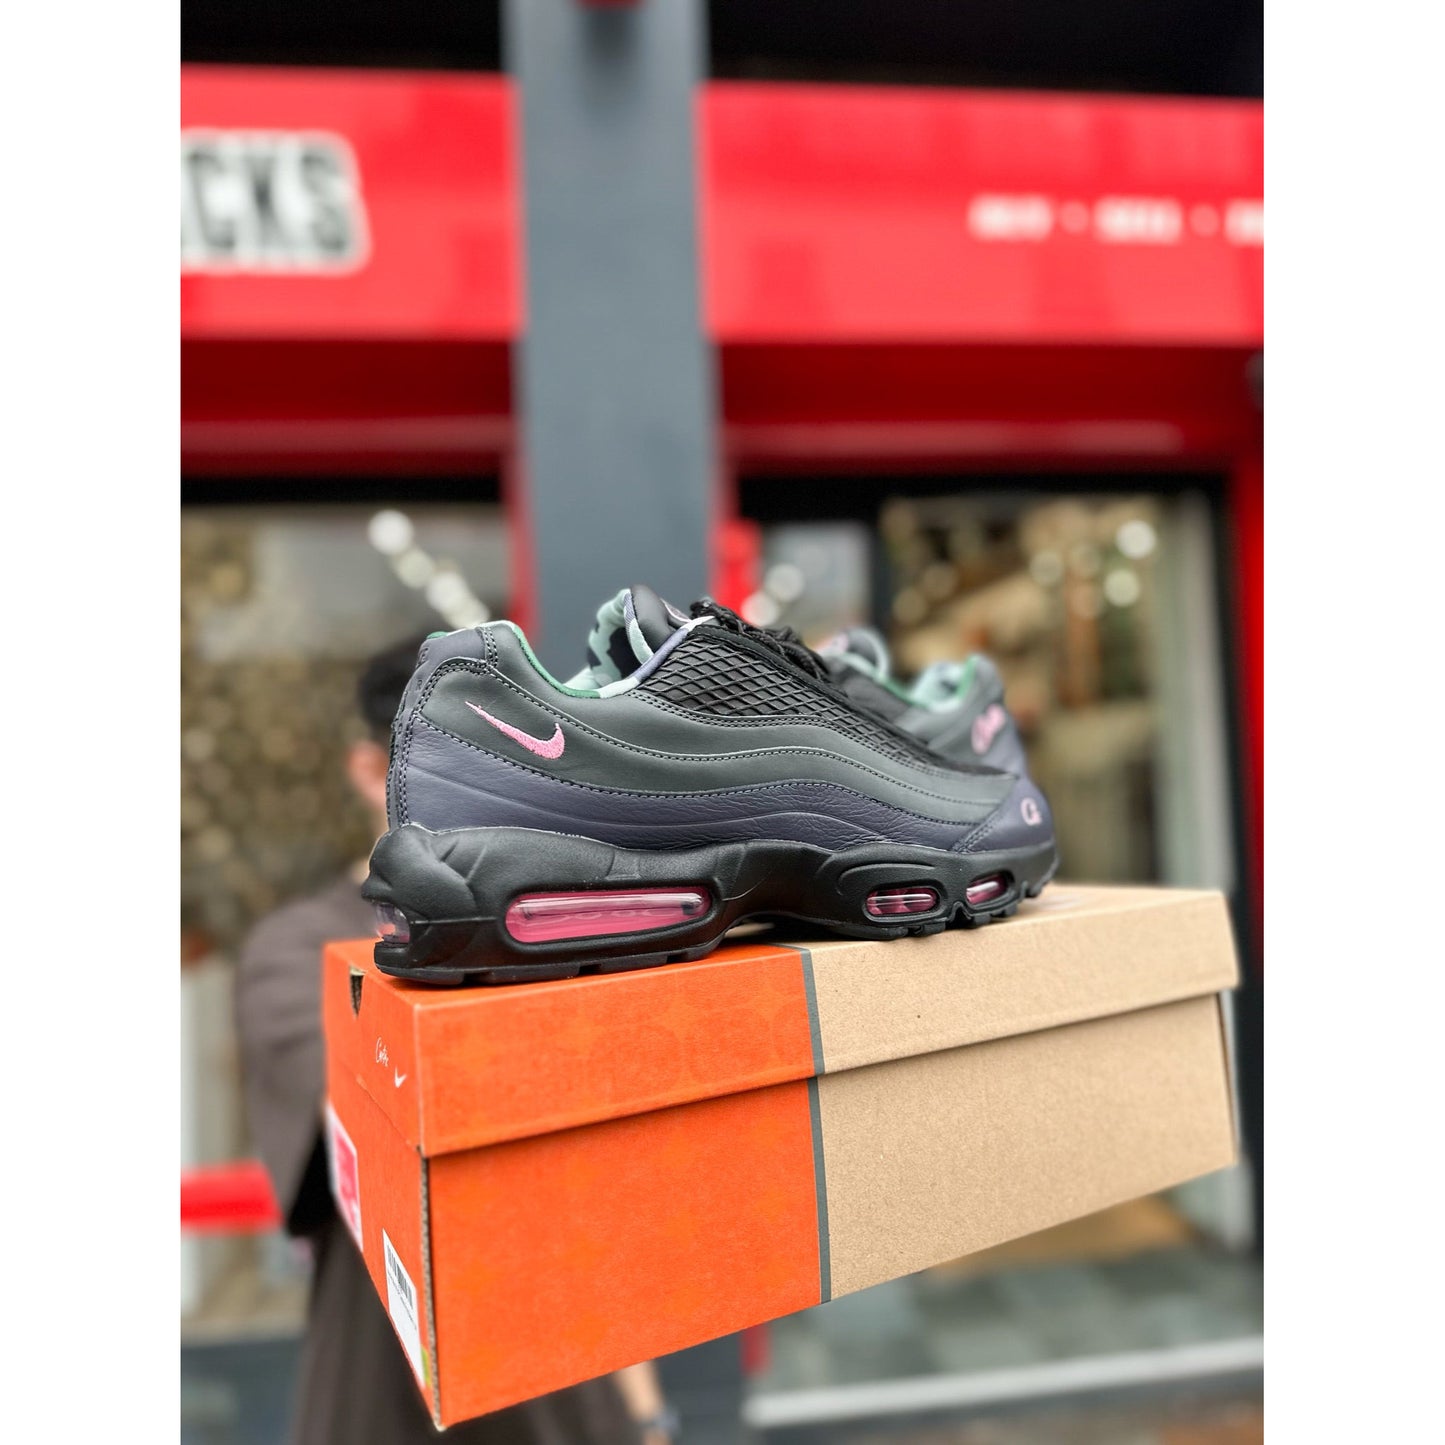 Nike Air Max 95 SP Corteiz Pink Beam by Nike from £300.00